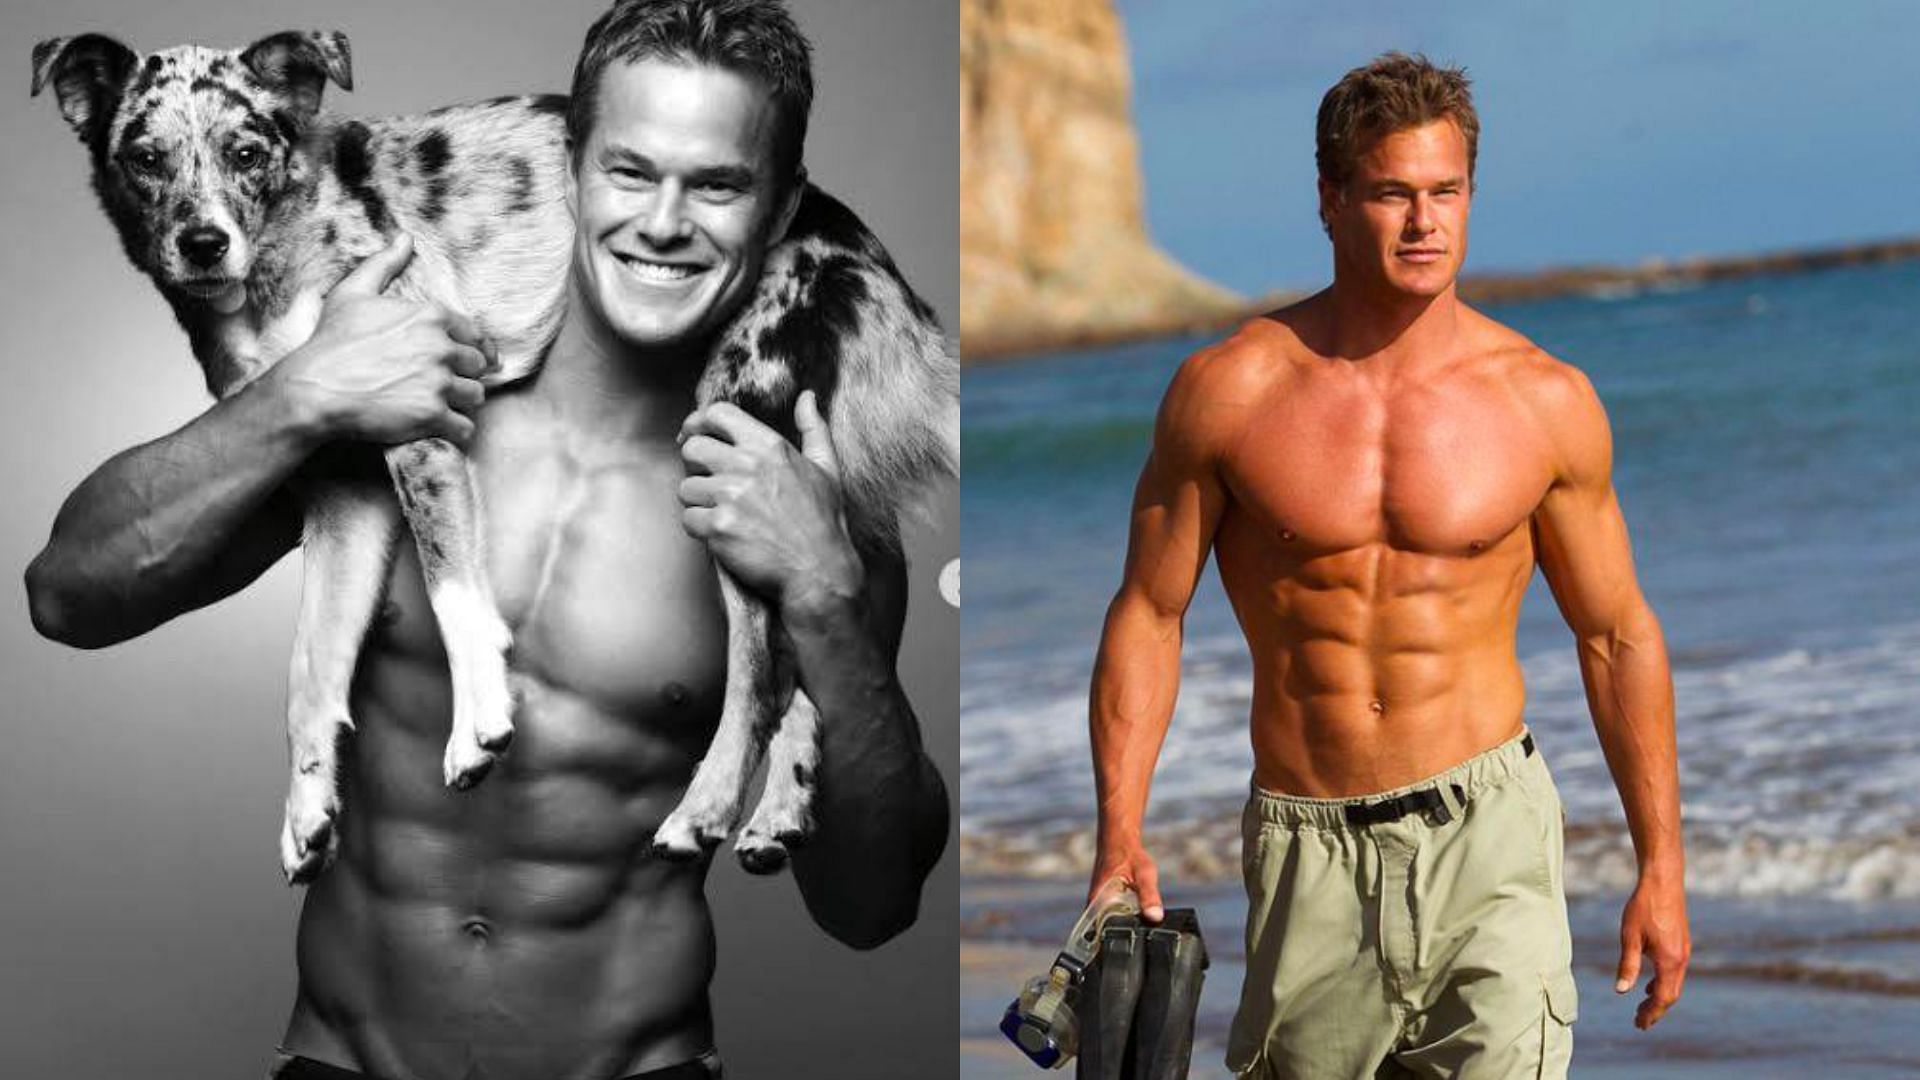 Alec Musser recognized not only for his acting but also as a fitness model (Image via @thepophive/X.com and Facebook)